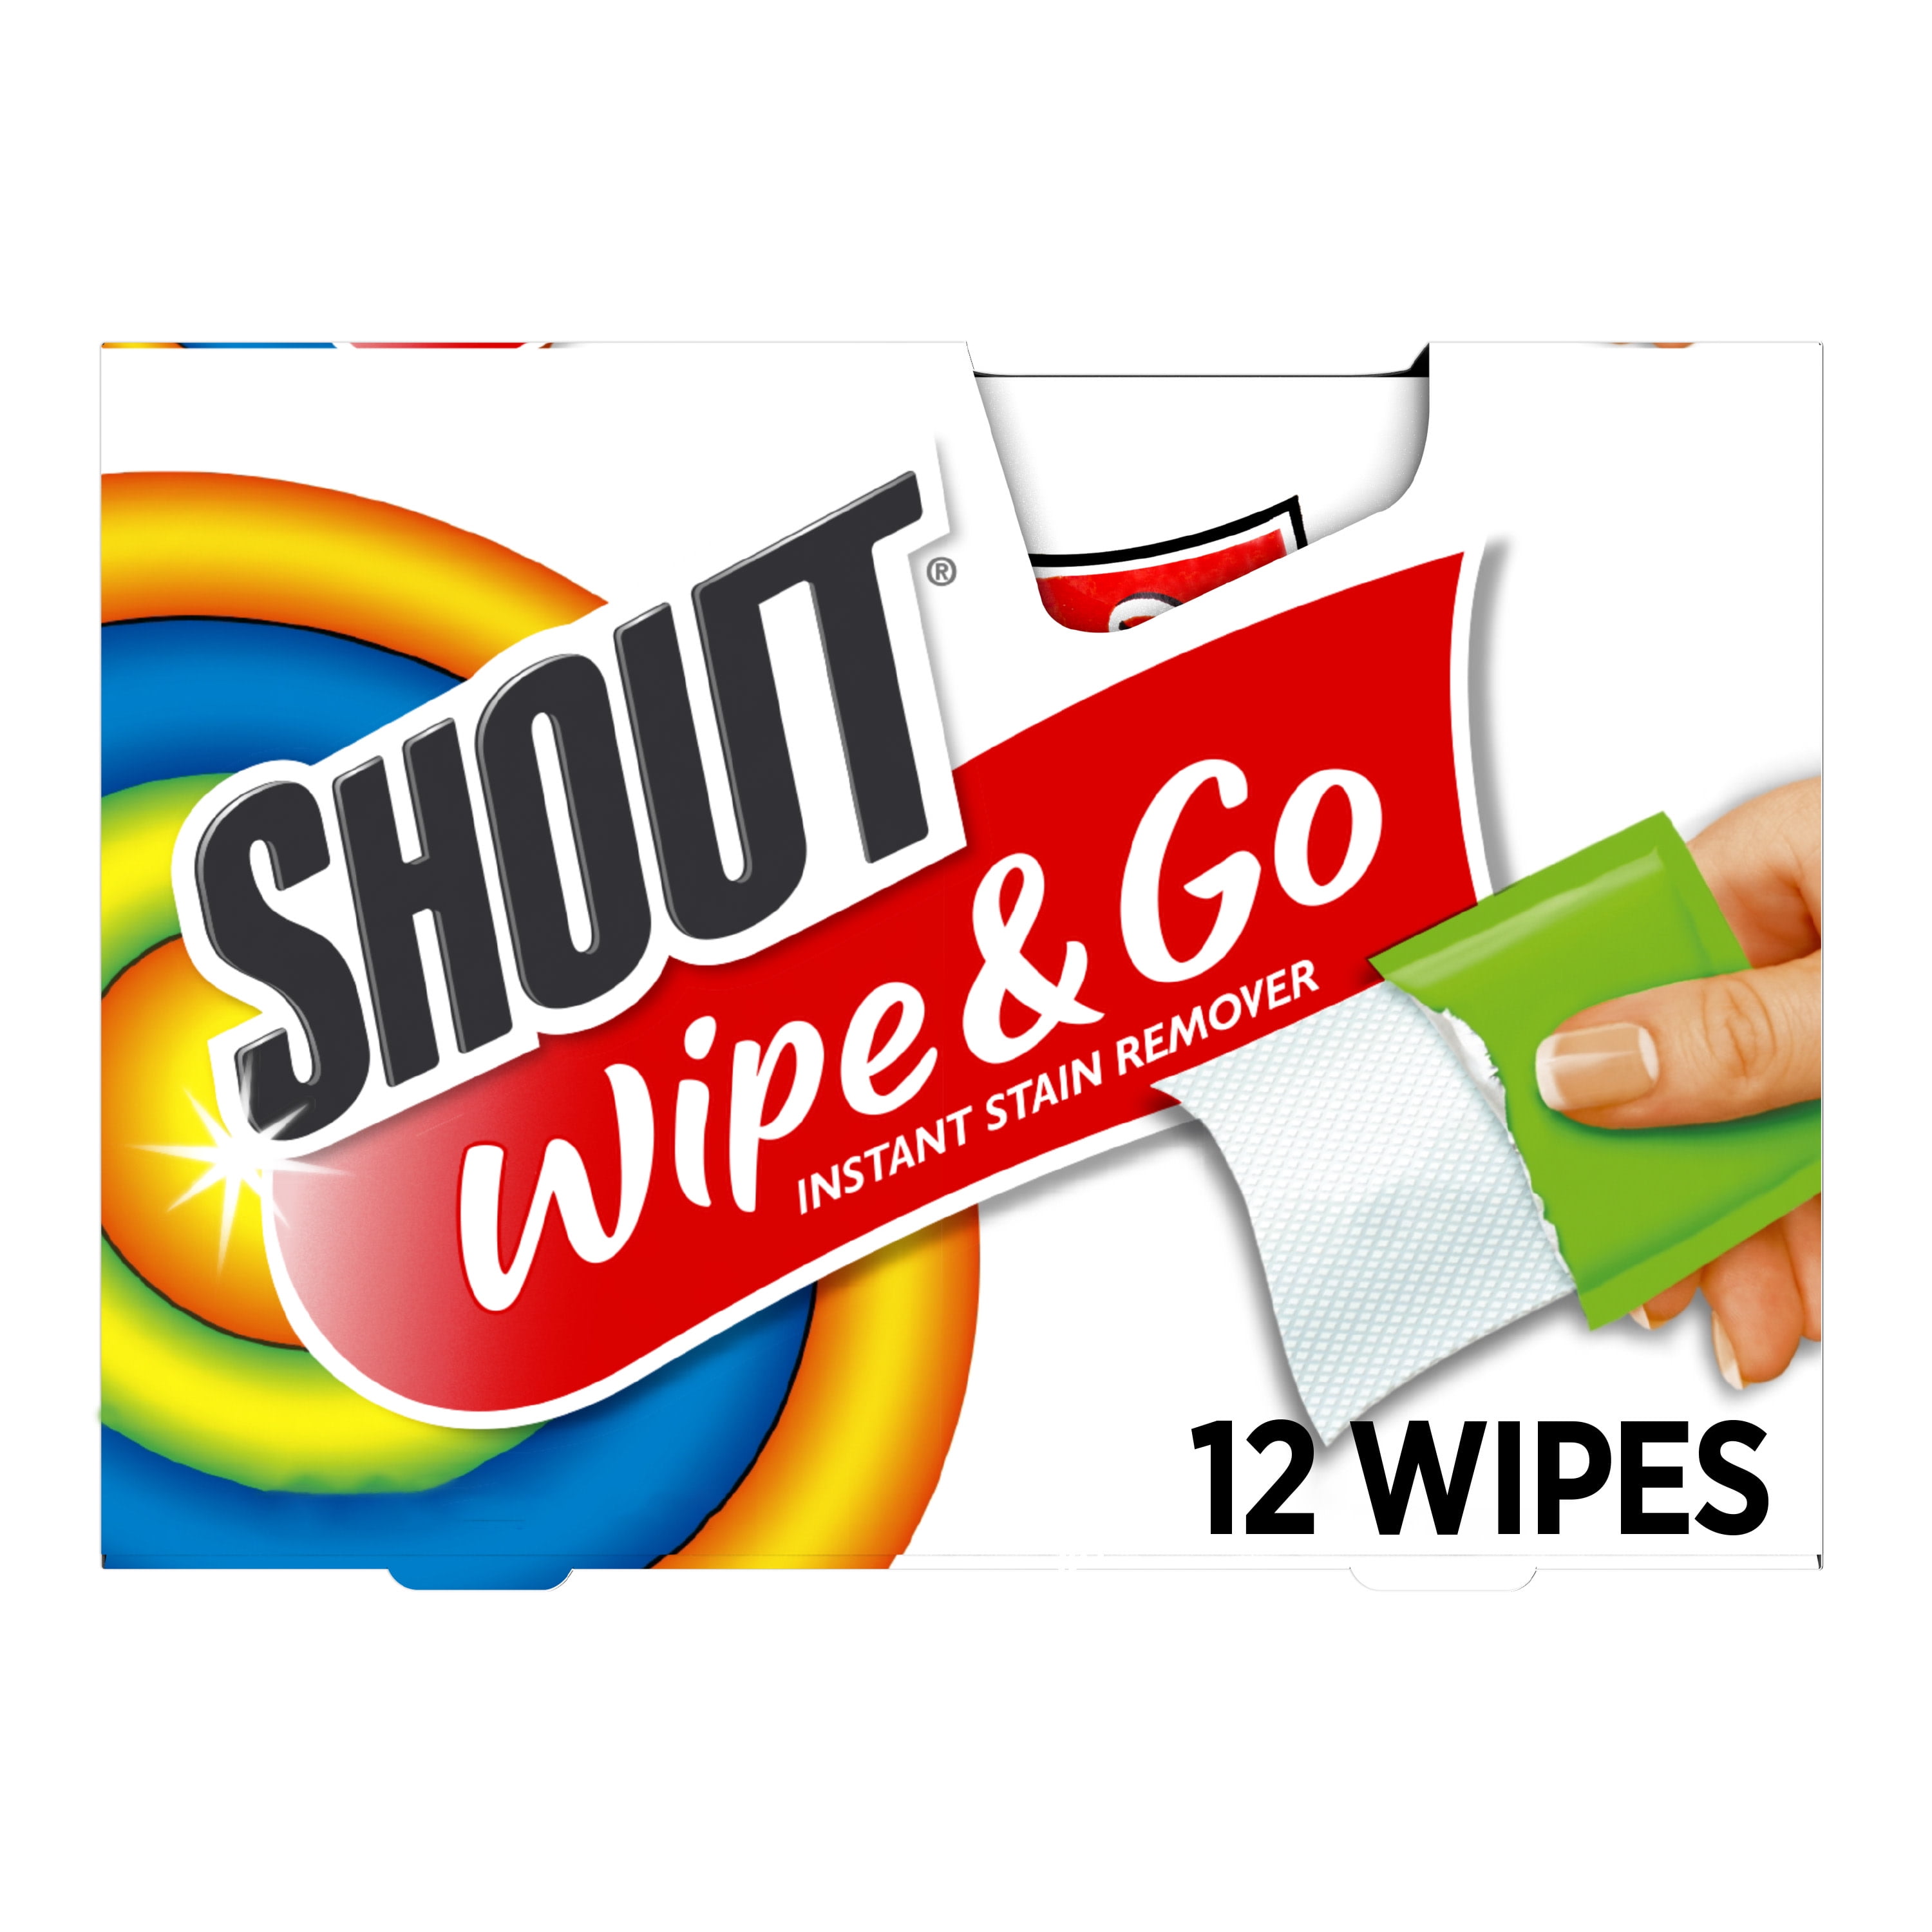 Diversey Shout® Wipes Plus Stain Treater Towelettes